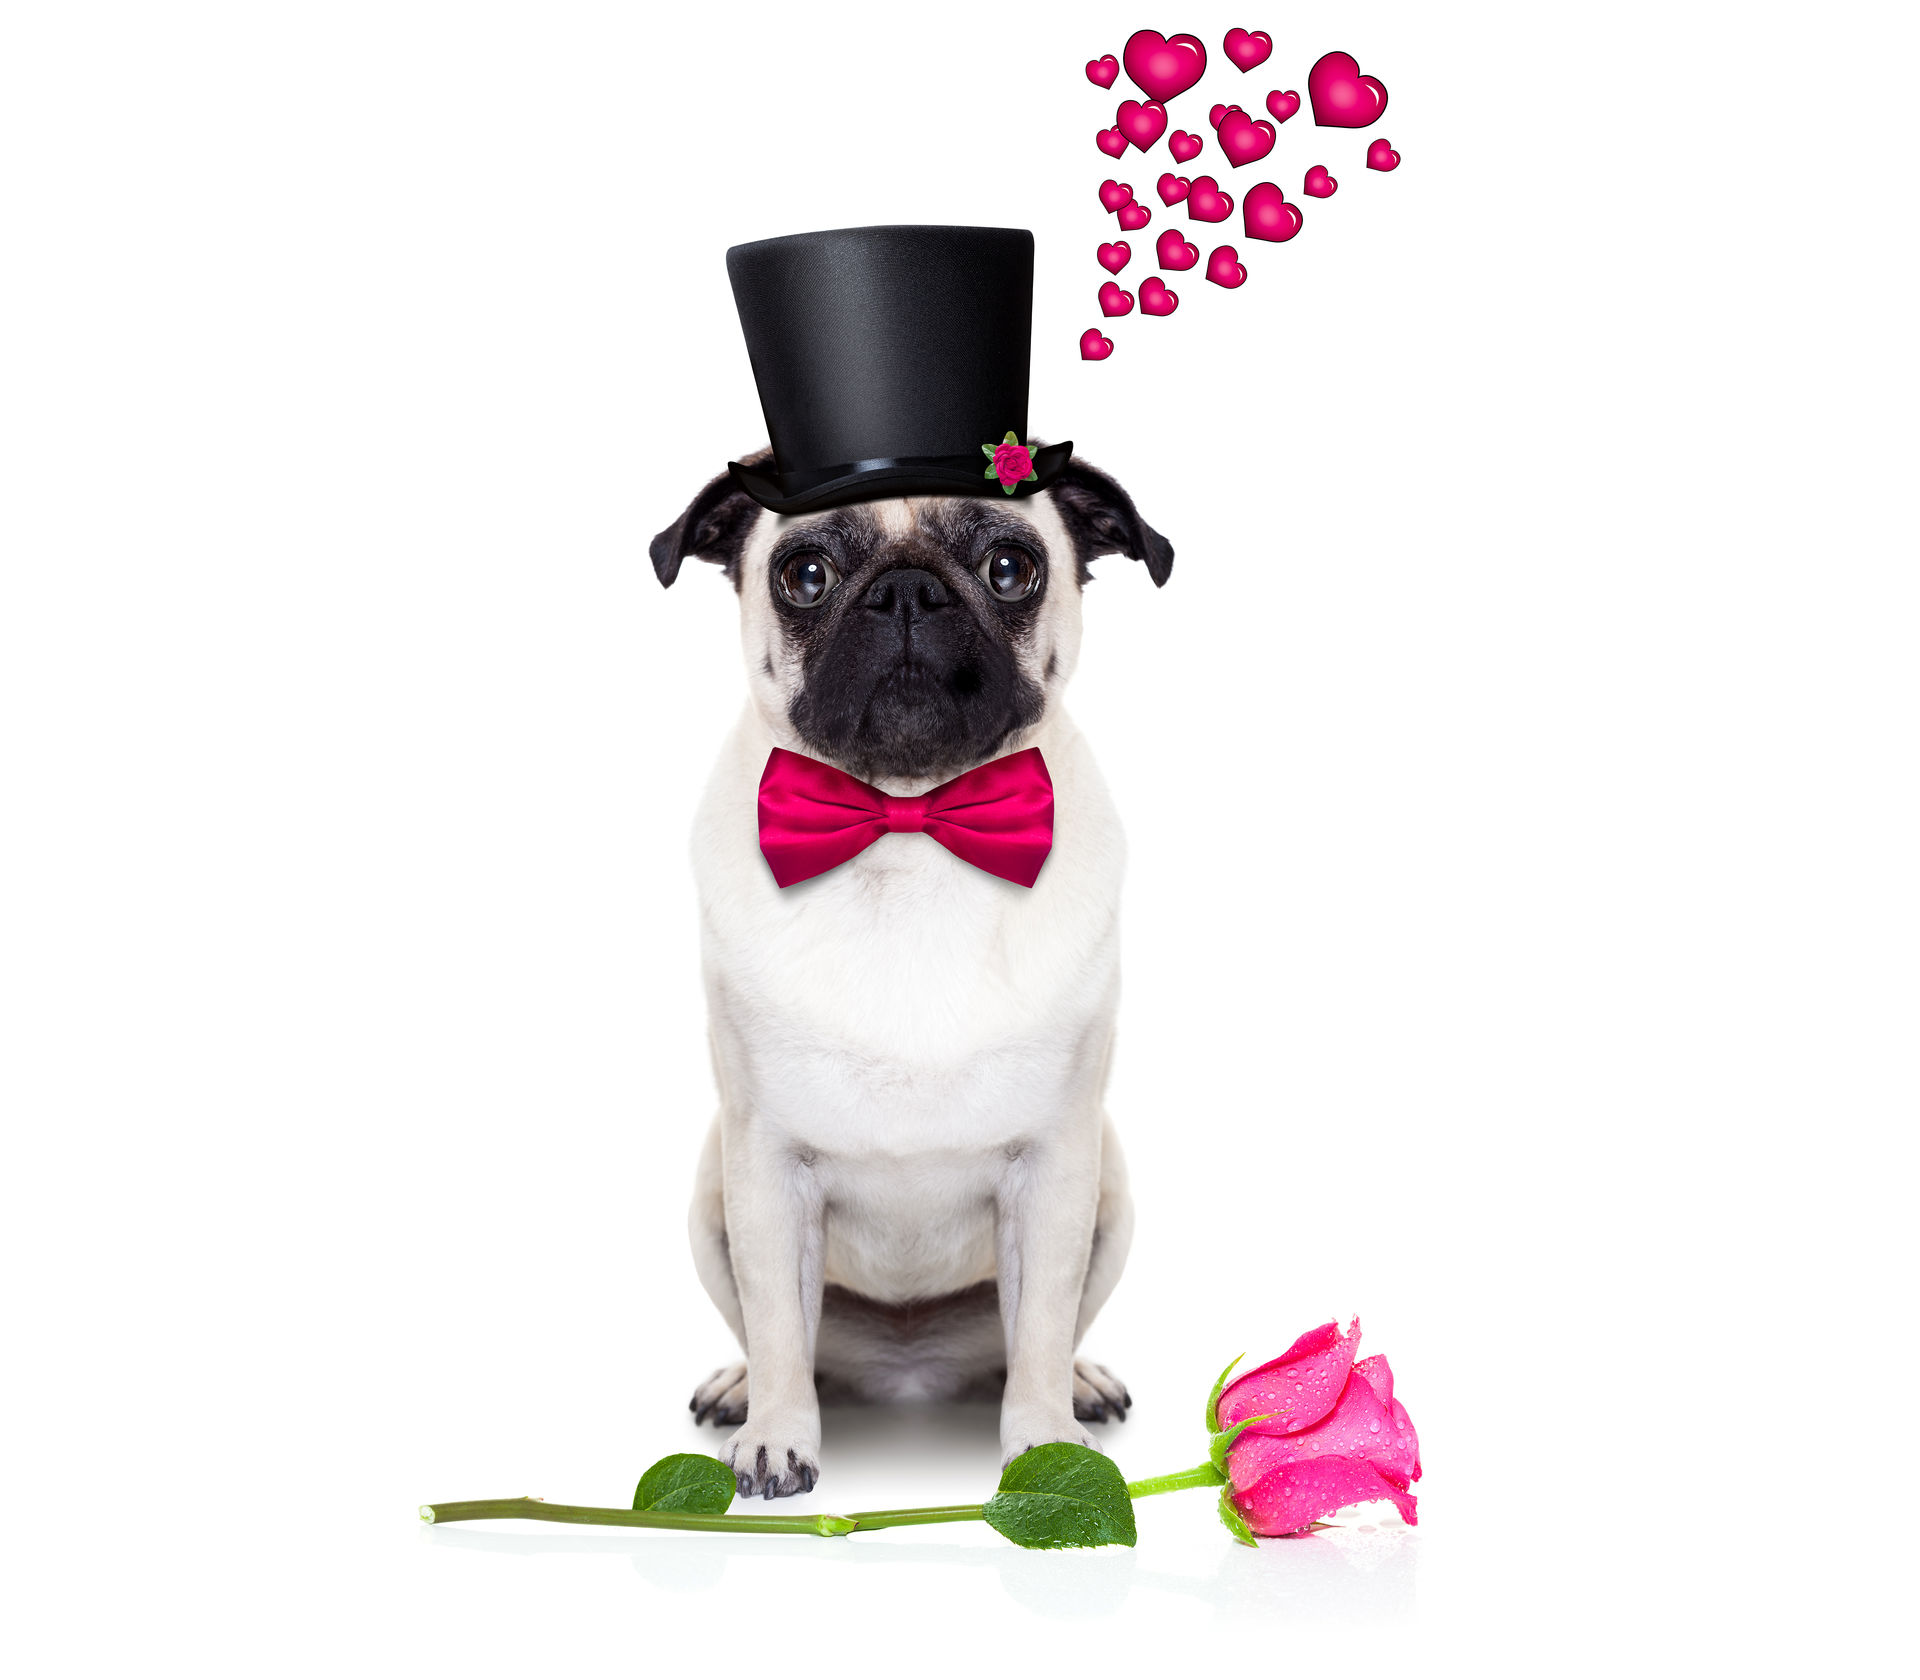 Valentine's Day Wallpaper Pug. Wallpaper of cute dogs and puppies. Pug Valentine's Day